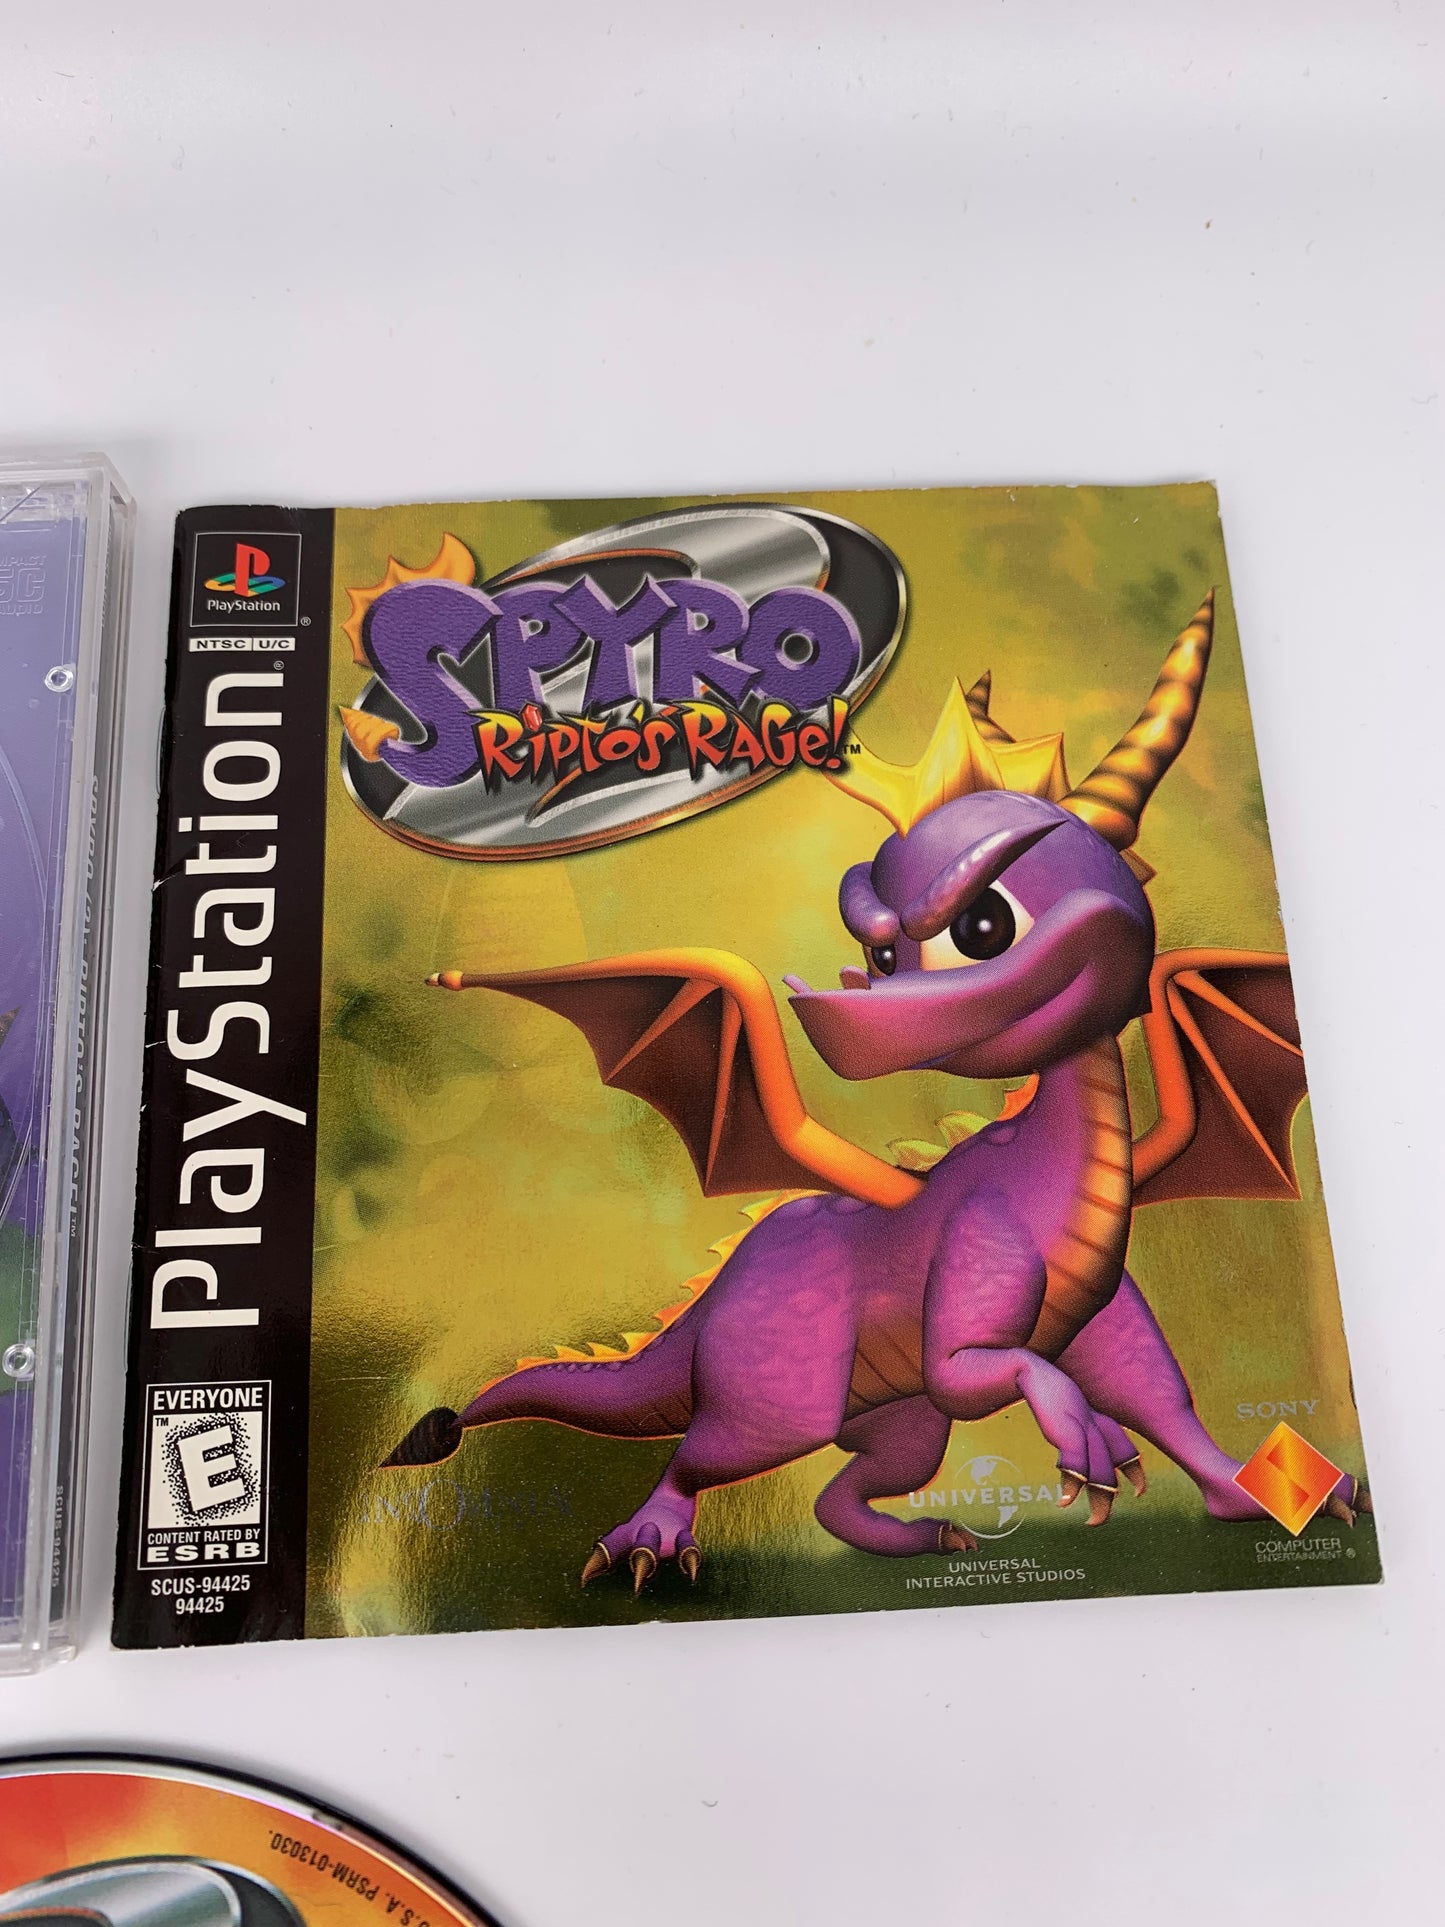 SONY PLAYSTATiON [PS1] | SPYRO 2 RiPTOS RAGE | GOLD FOiL COVER VERSiON